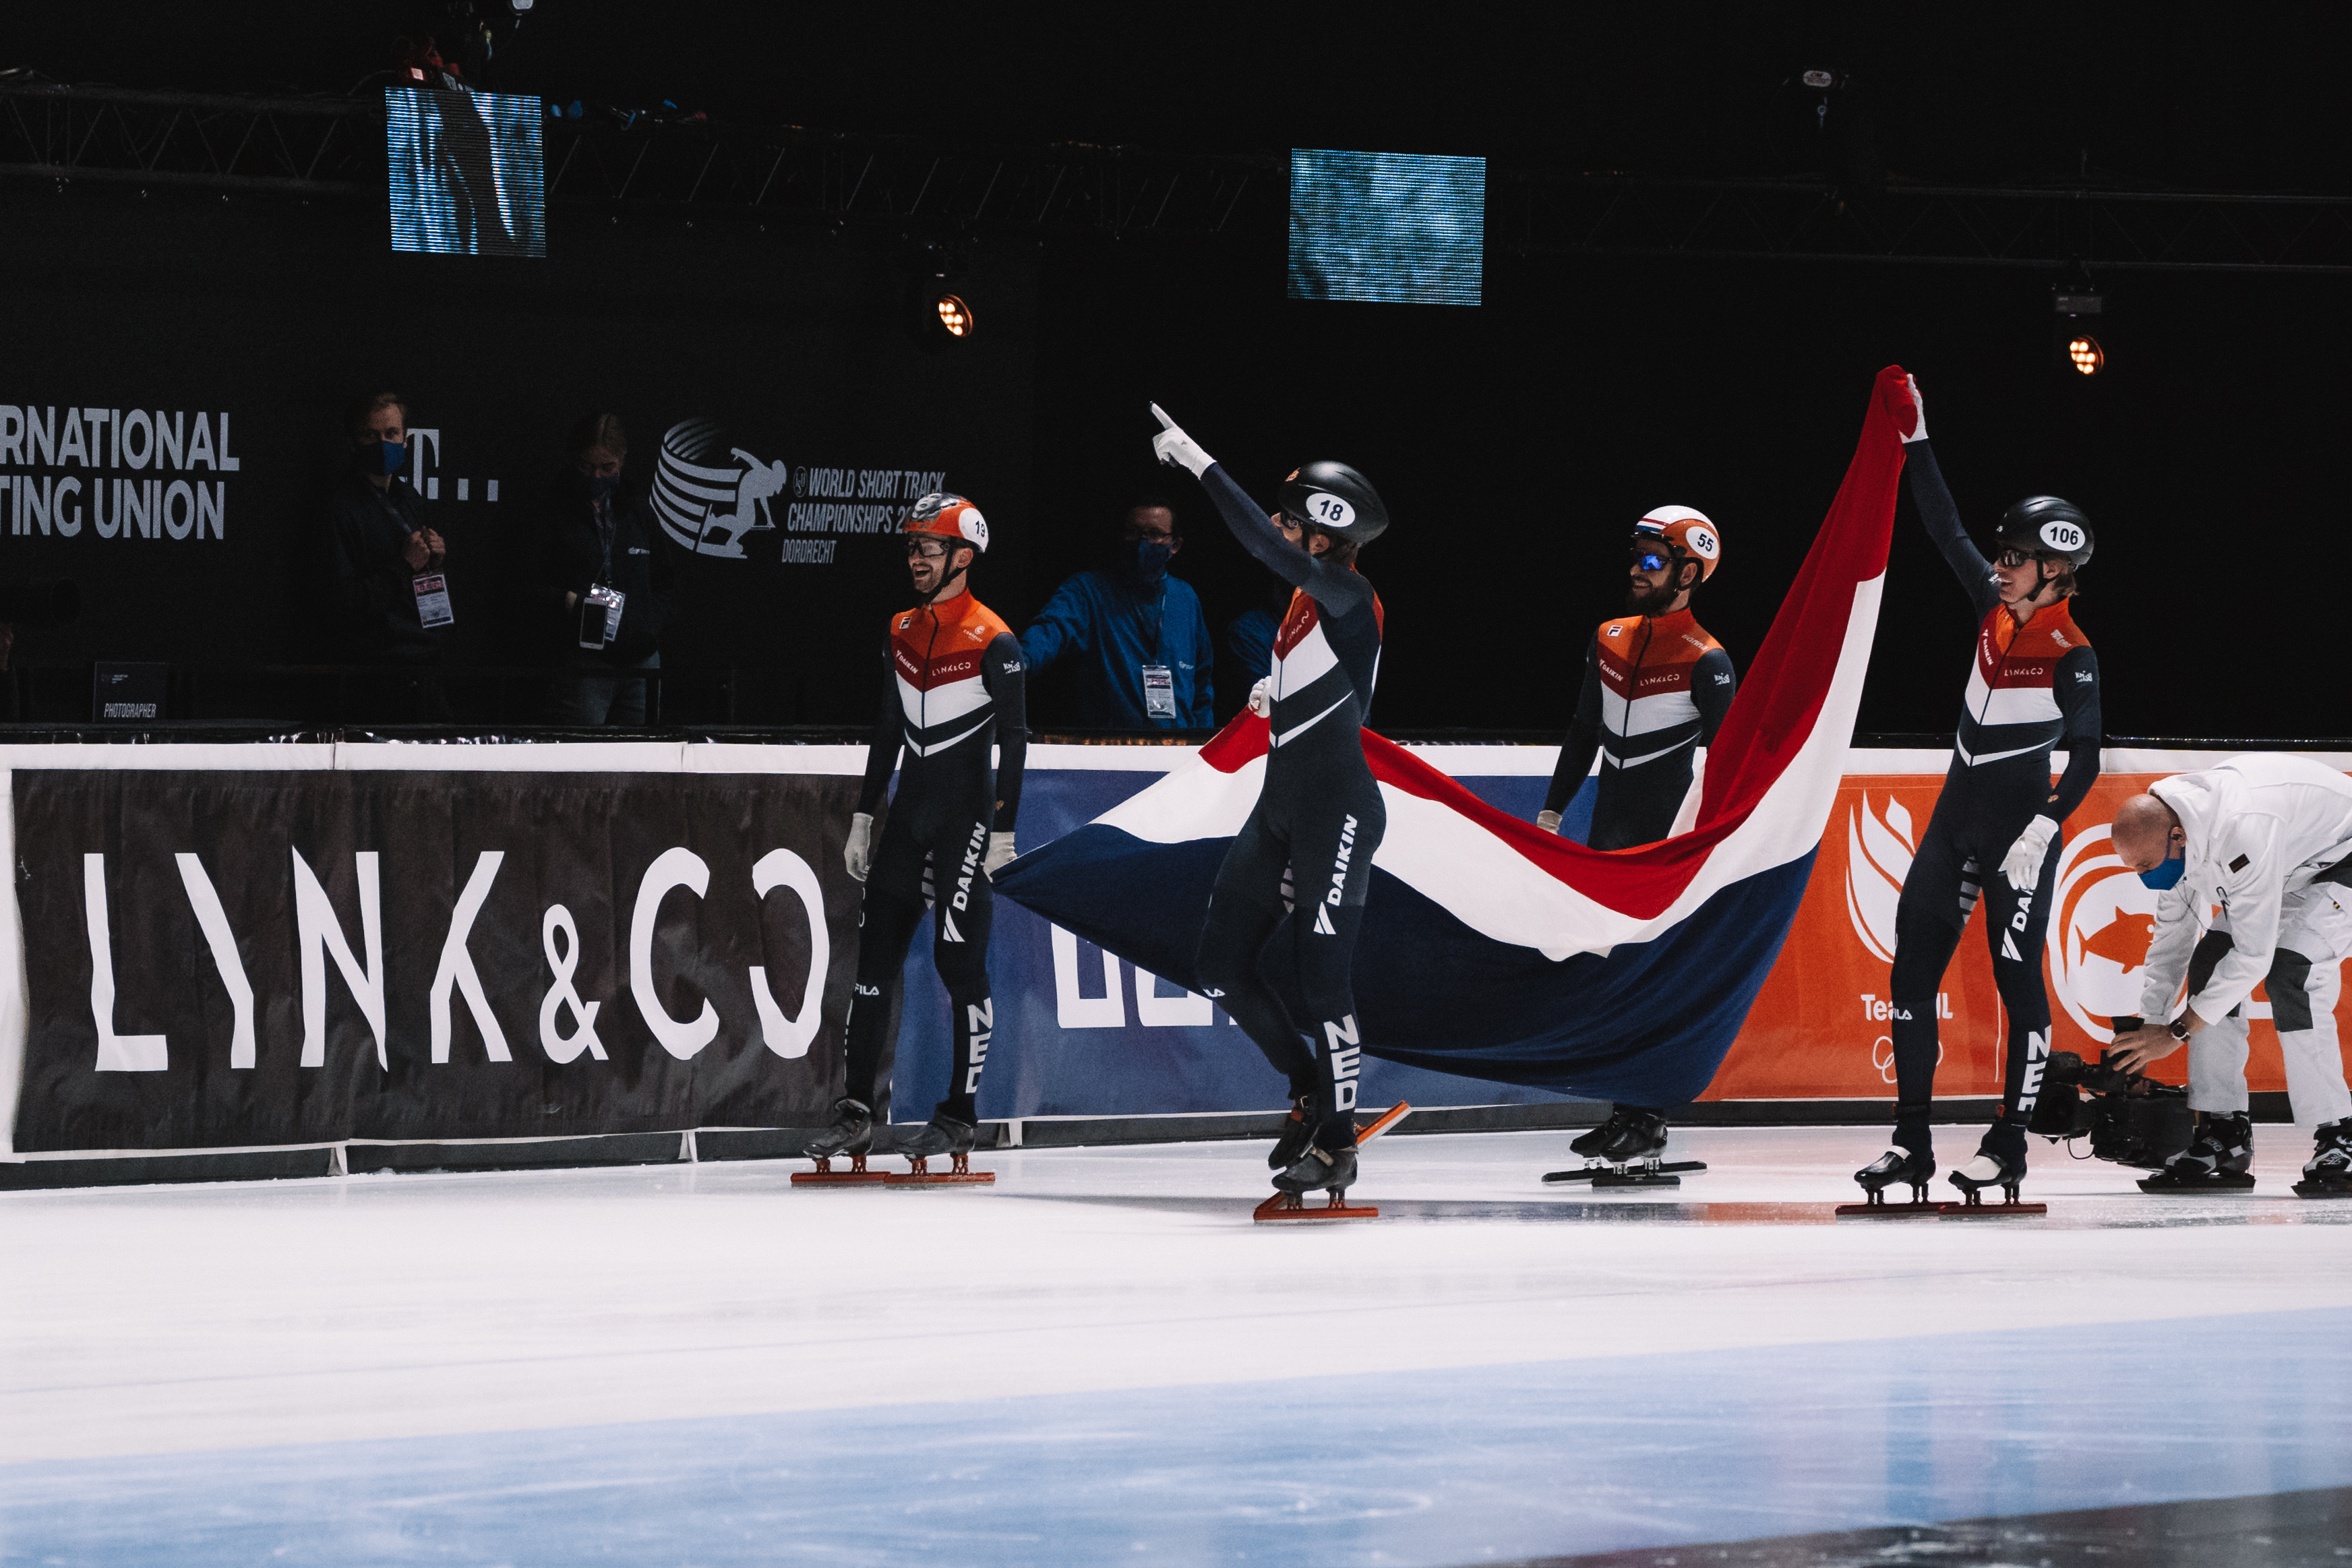 We’re extremely proud to be partnering with them as they work towards the 2022 Winter Olympics